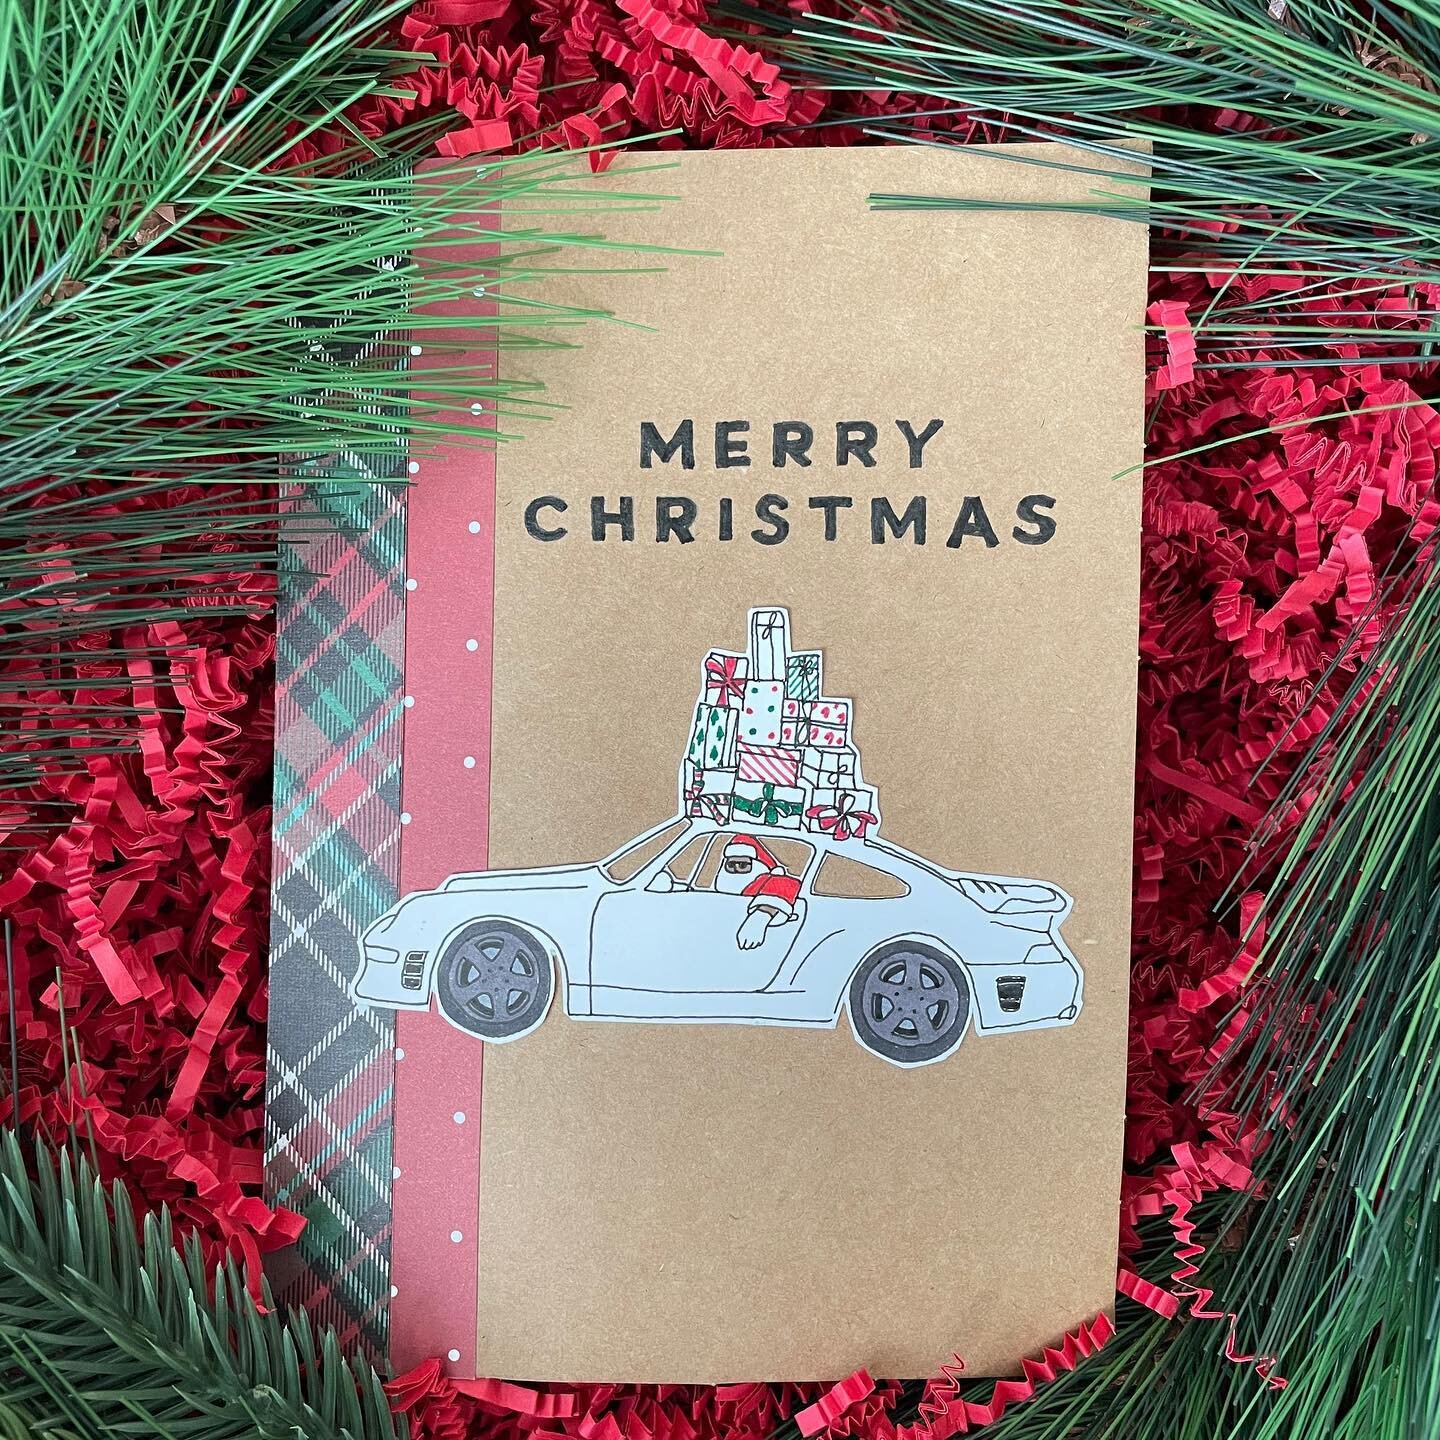 Our friends over at @otherworksco just recently released their Christmas card collection for this year. 🙂 this year features Santa delivering gifts in a #993 #Turbo. 
This is the perfect card for your favorite Porsche enthusiast that&rsquo;s been go